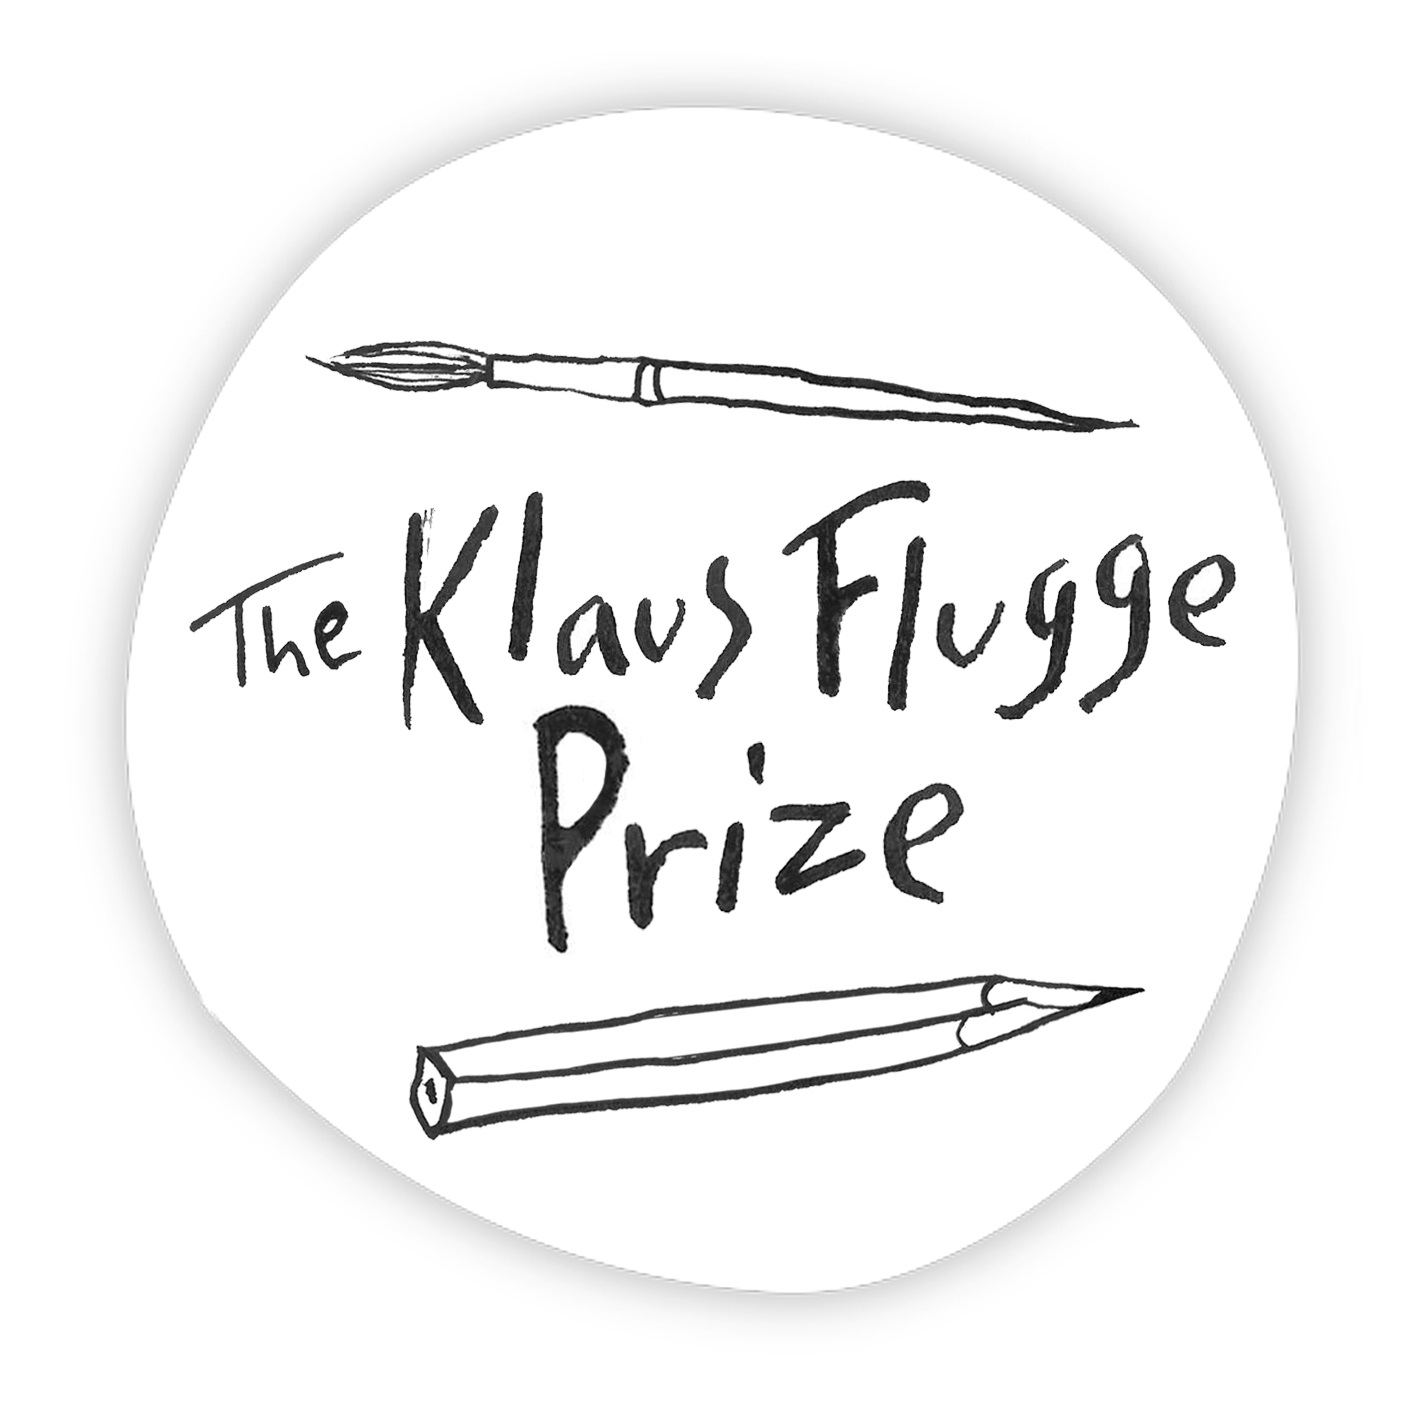 Longlist Announced for the 2021 Klaus Flugge Prize